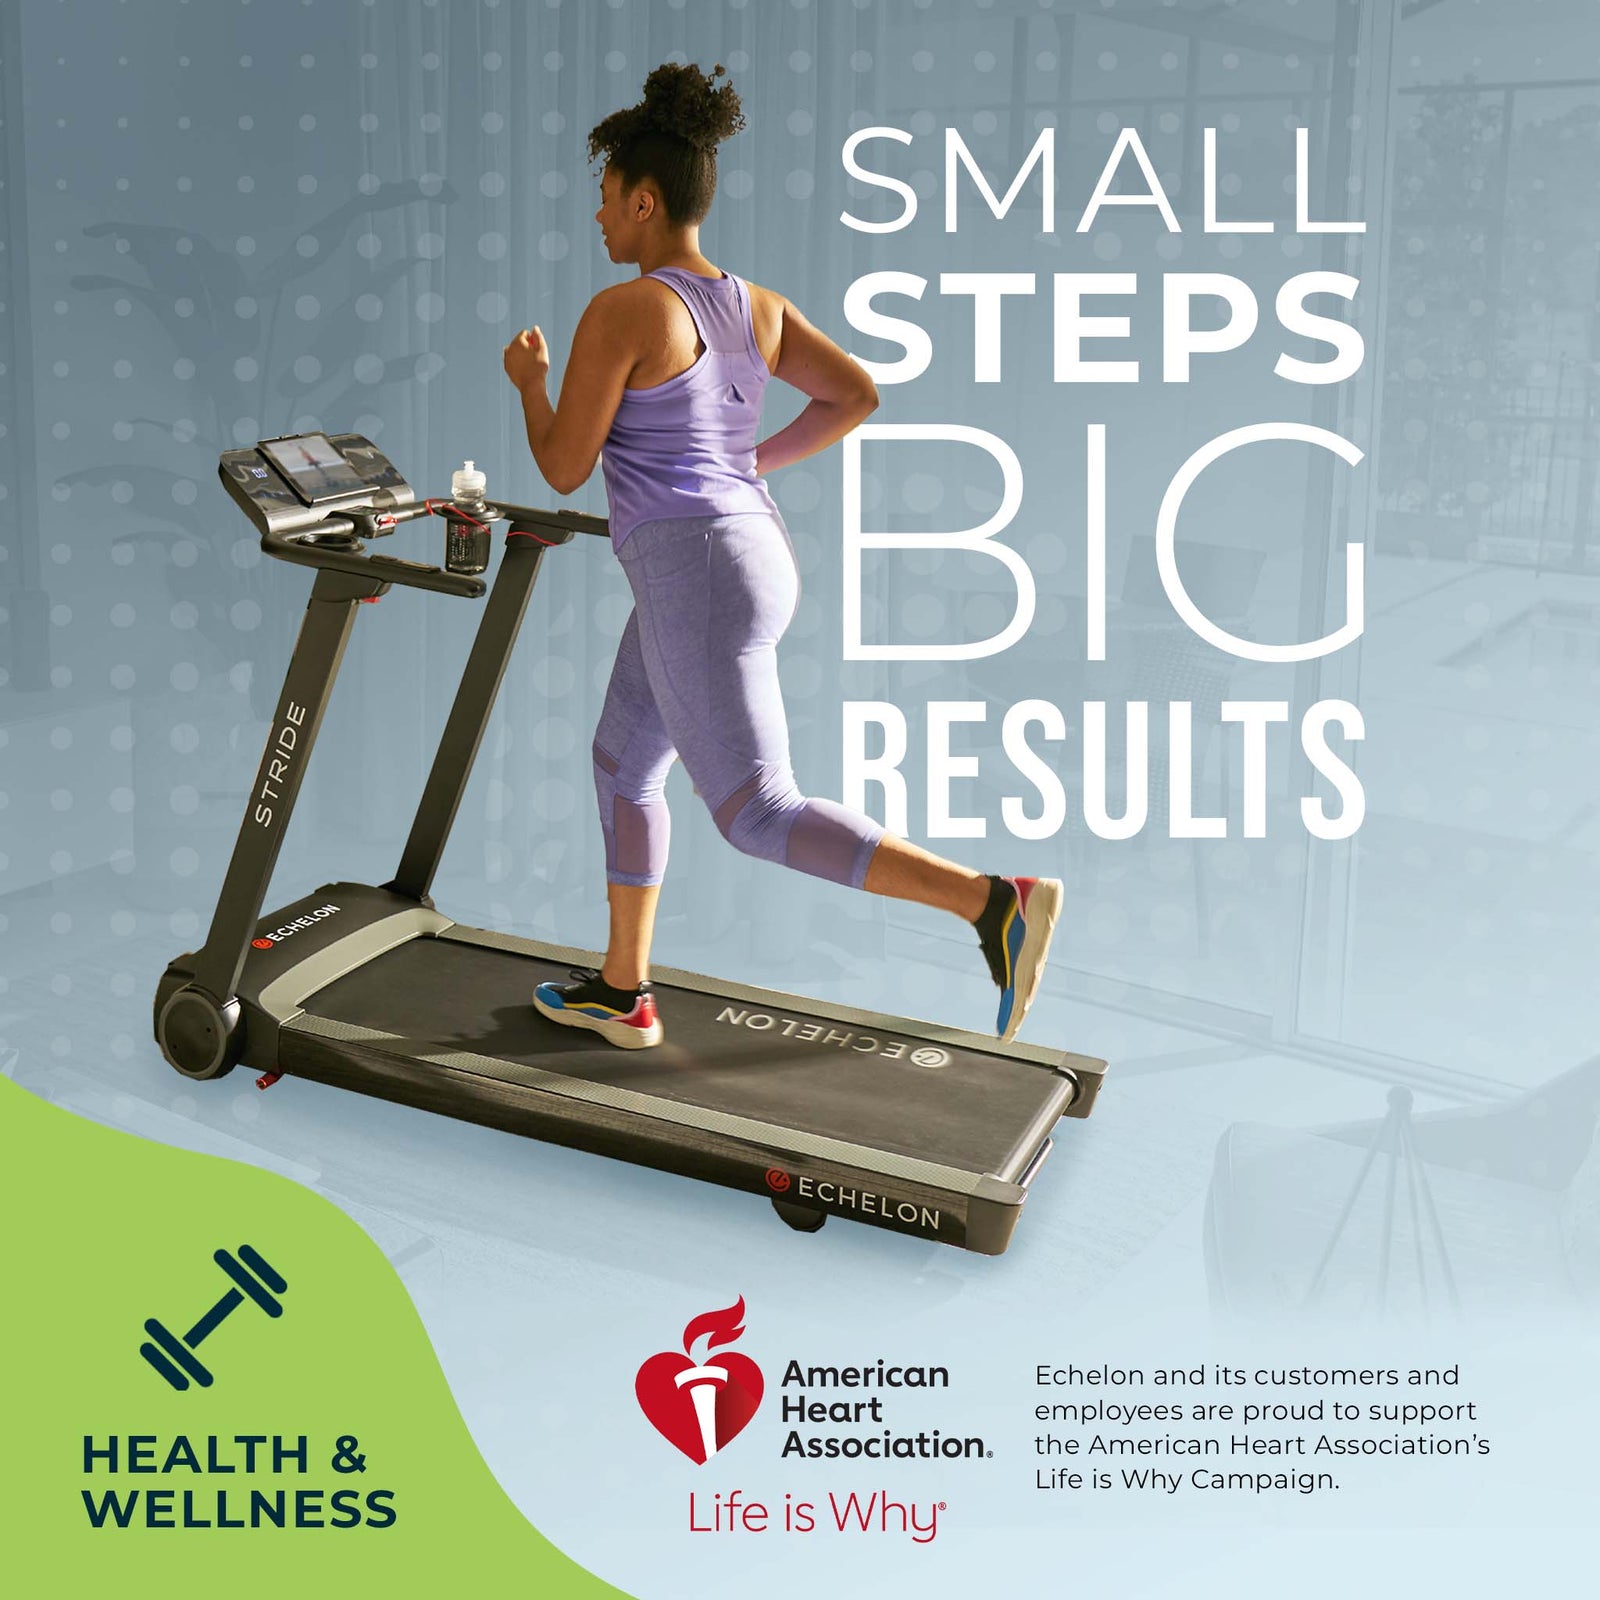 Small Steps Big Results - Echelon Fit US